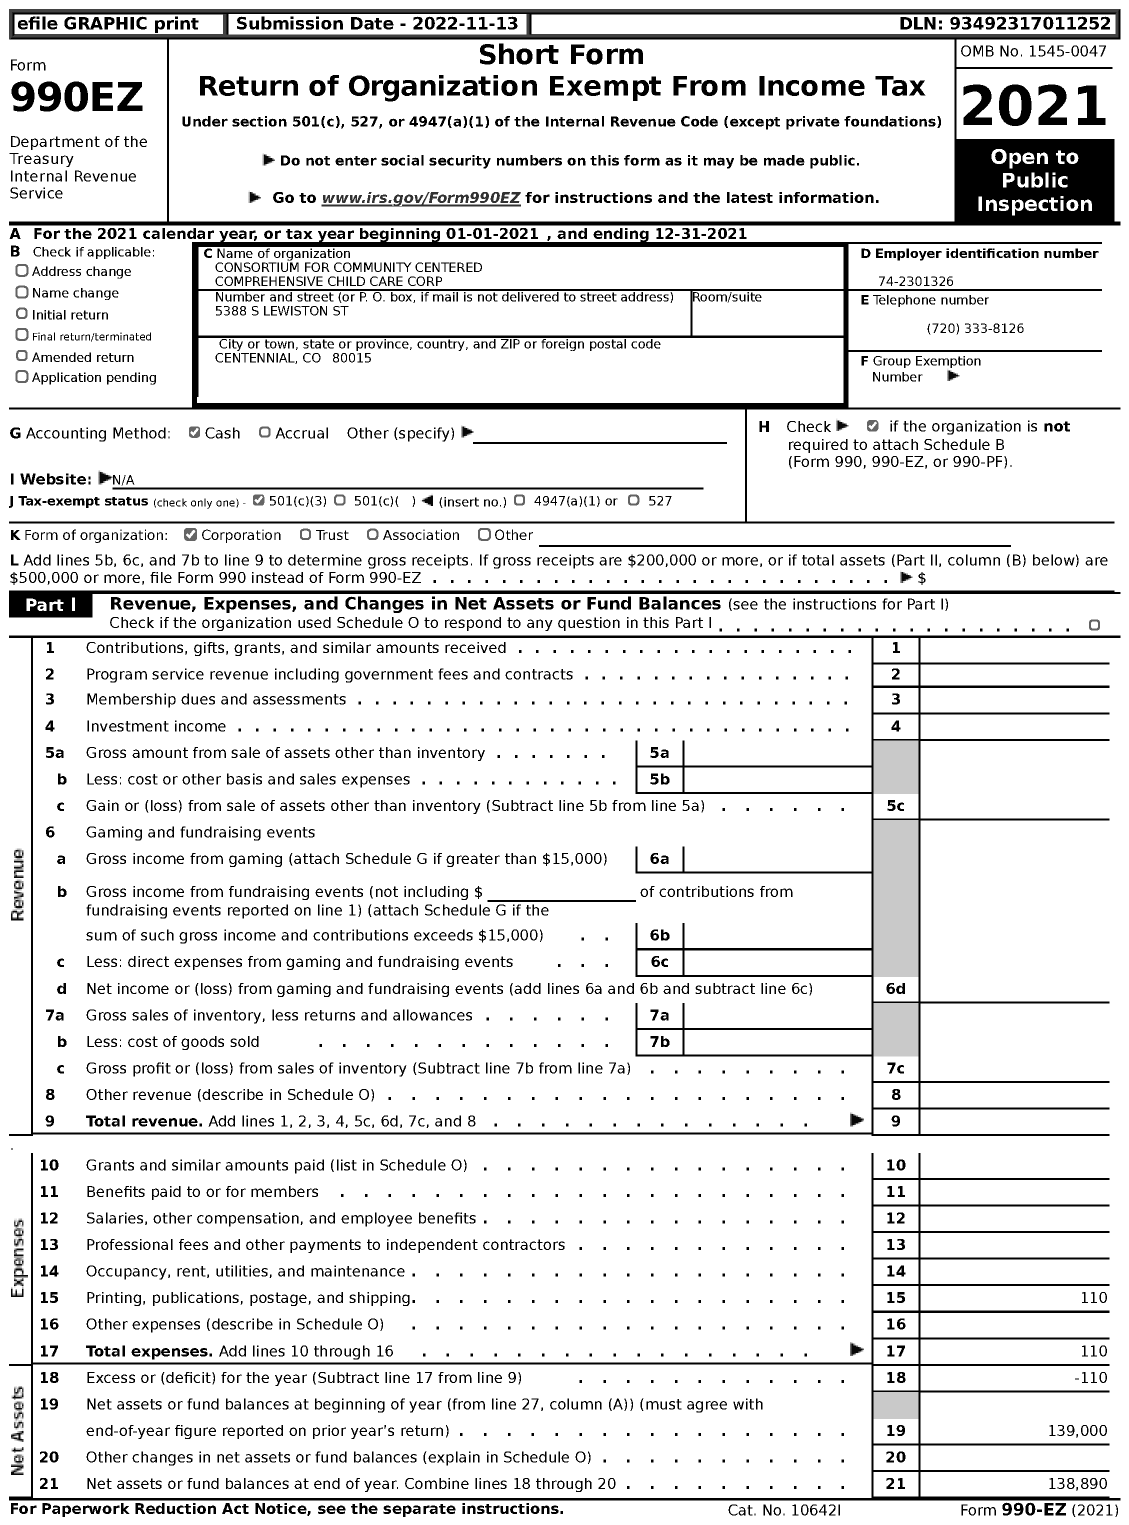 Image of first page of 2021 Form 990EZ for Consortium for Community Centered Comprehensive Child Care Corporation